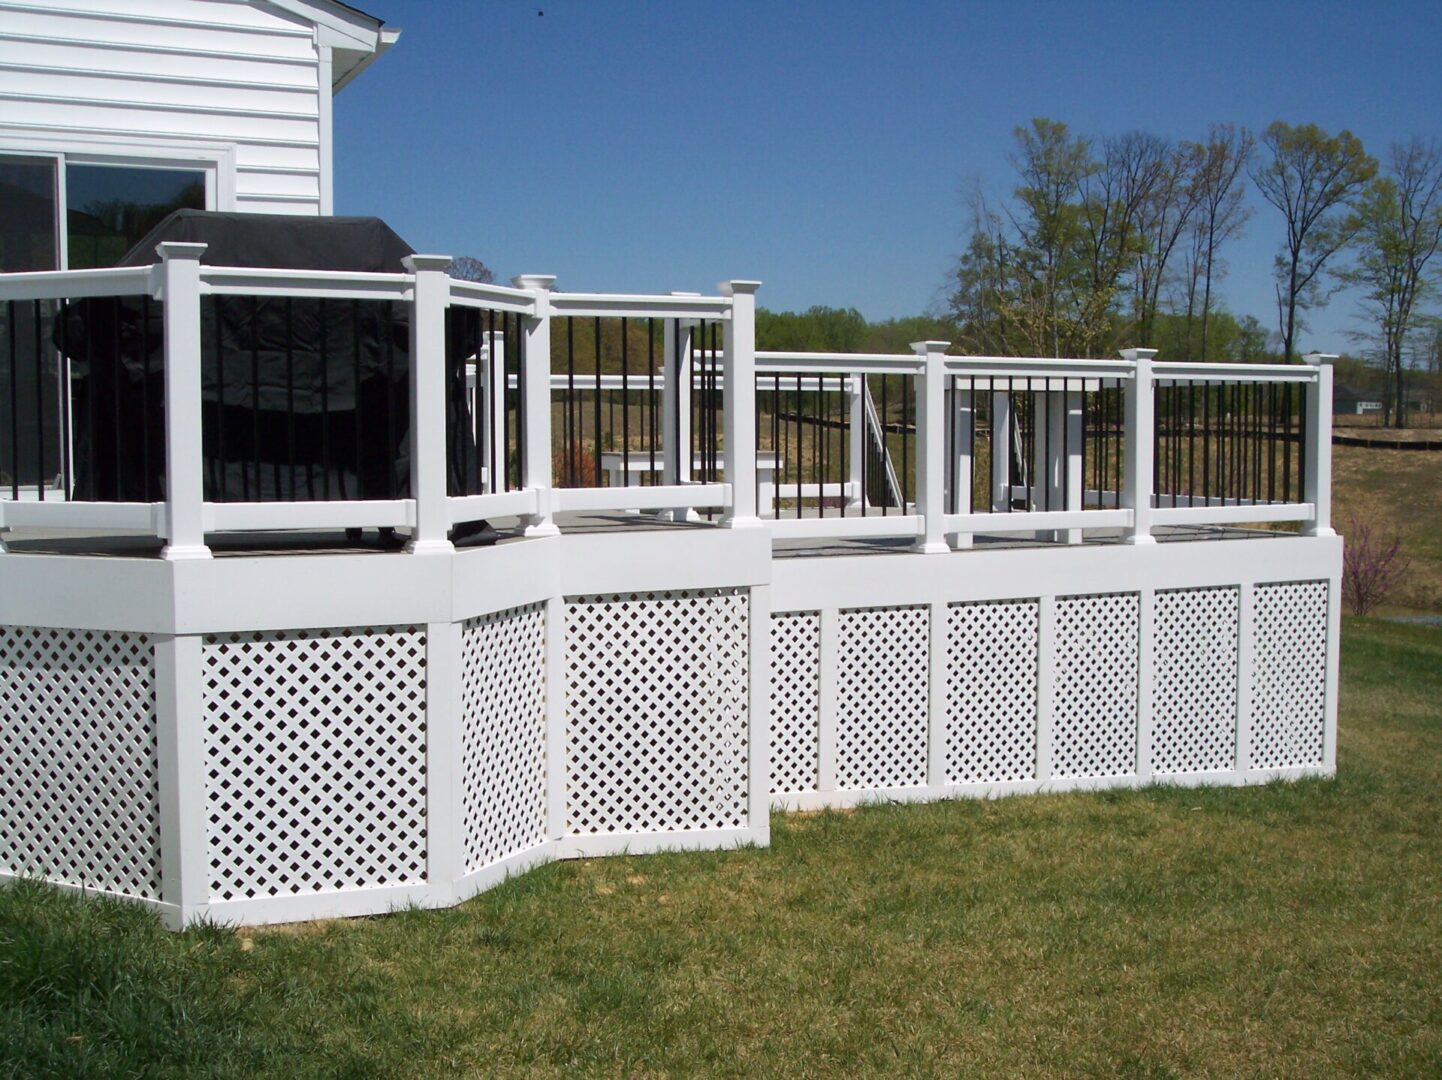 Spacious and elevated white wooden deck with black metal barriers